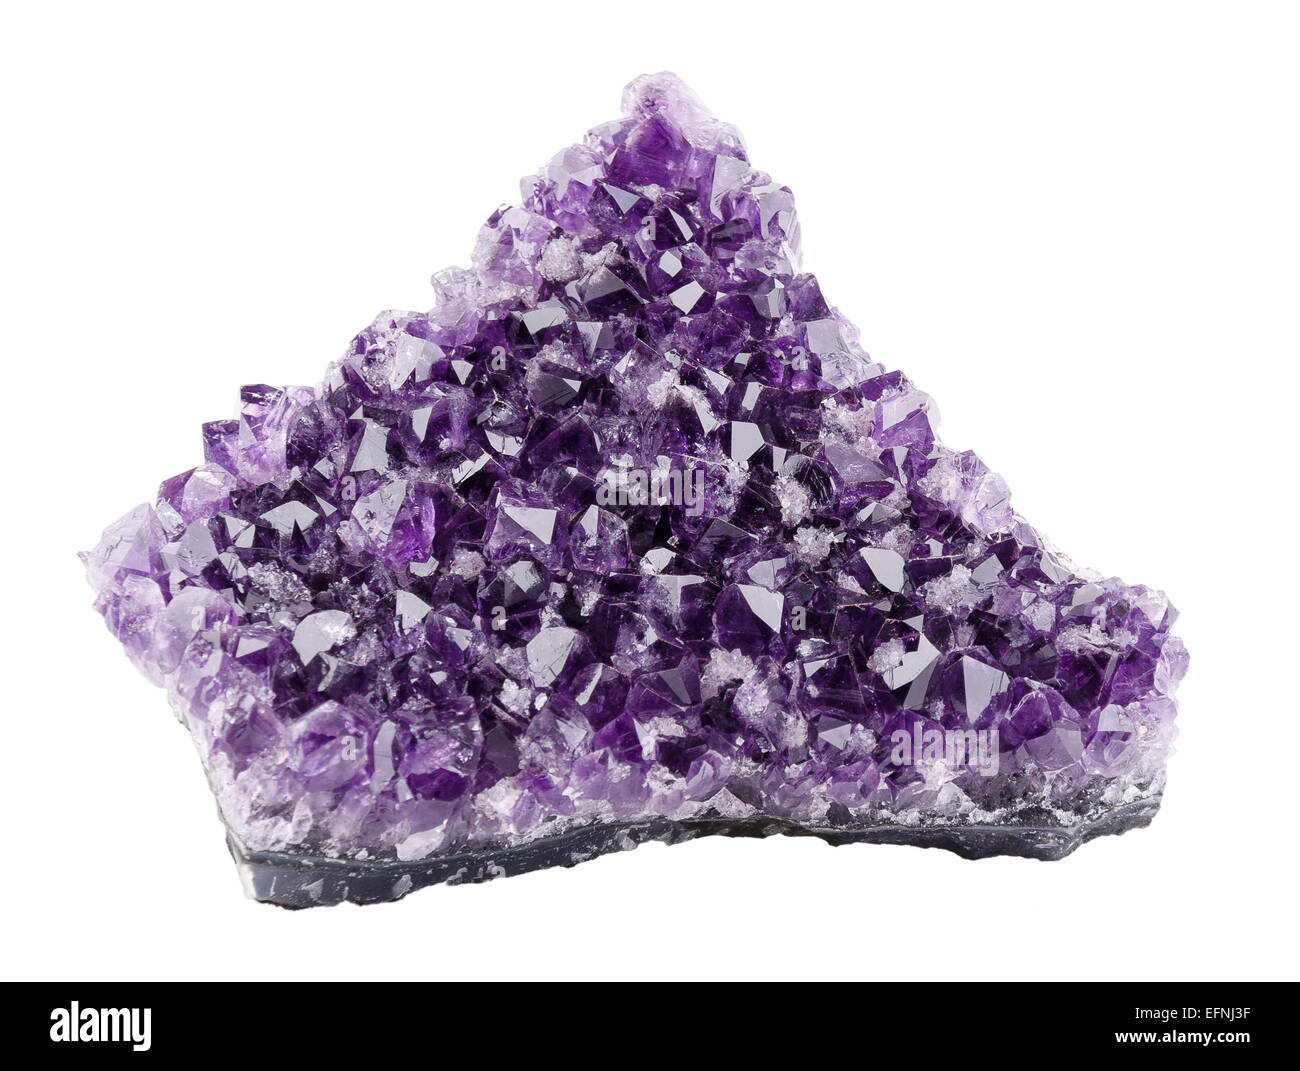 Amethyst over white background, a violet variety of quartz, often used in jewelry. Silica, silicon dioxide, SiO2. Stock Photo